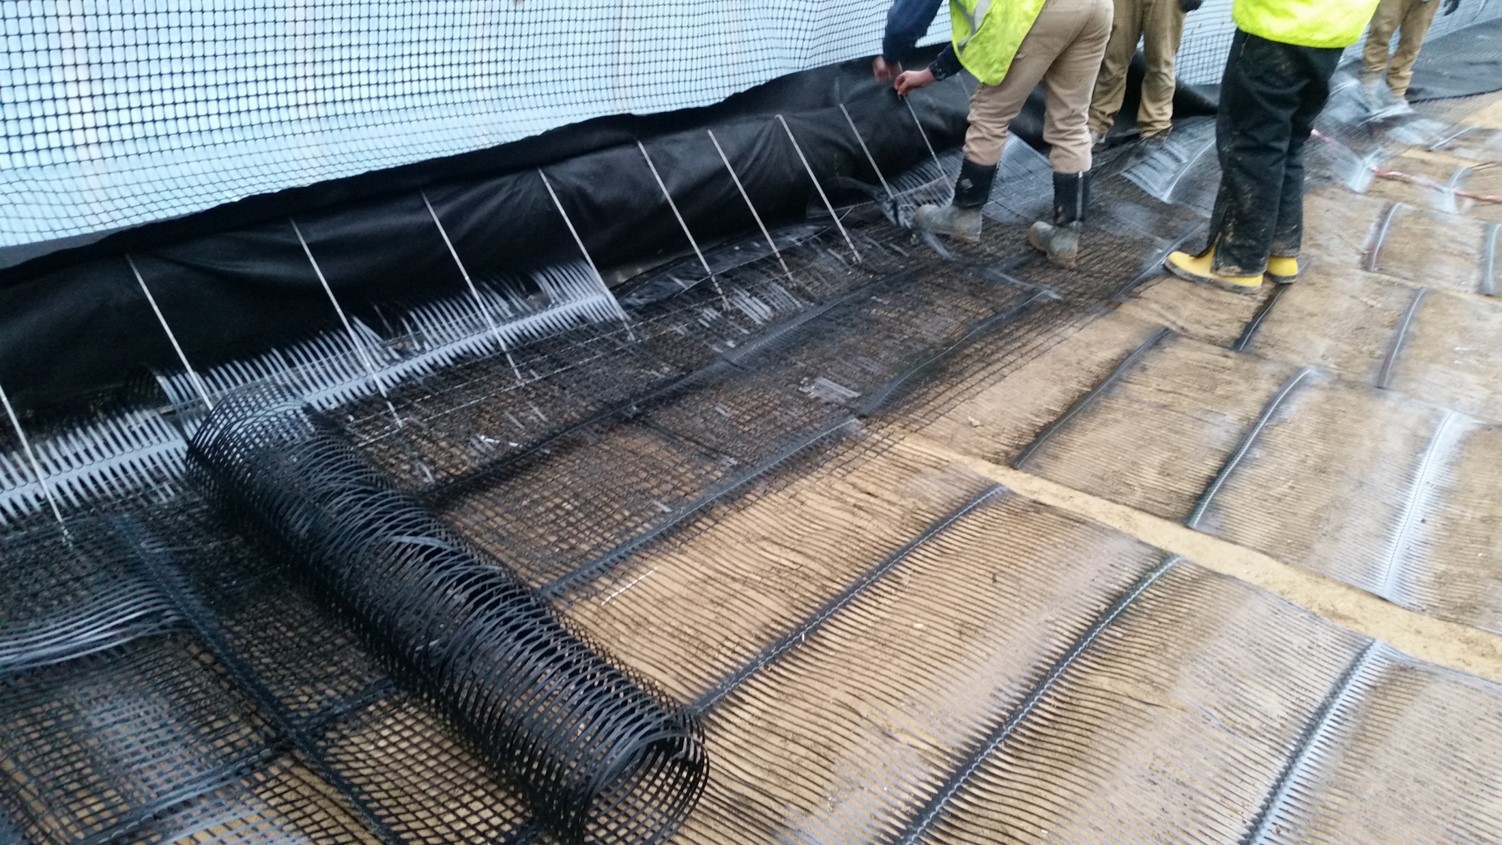 Uniaxial geogrid with braced baskets